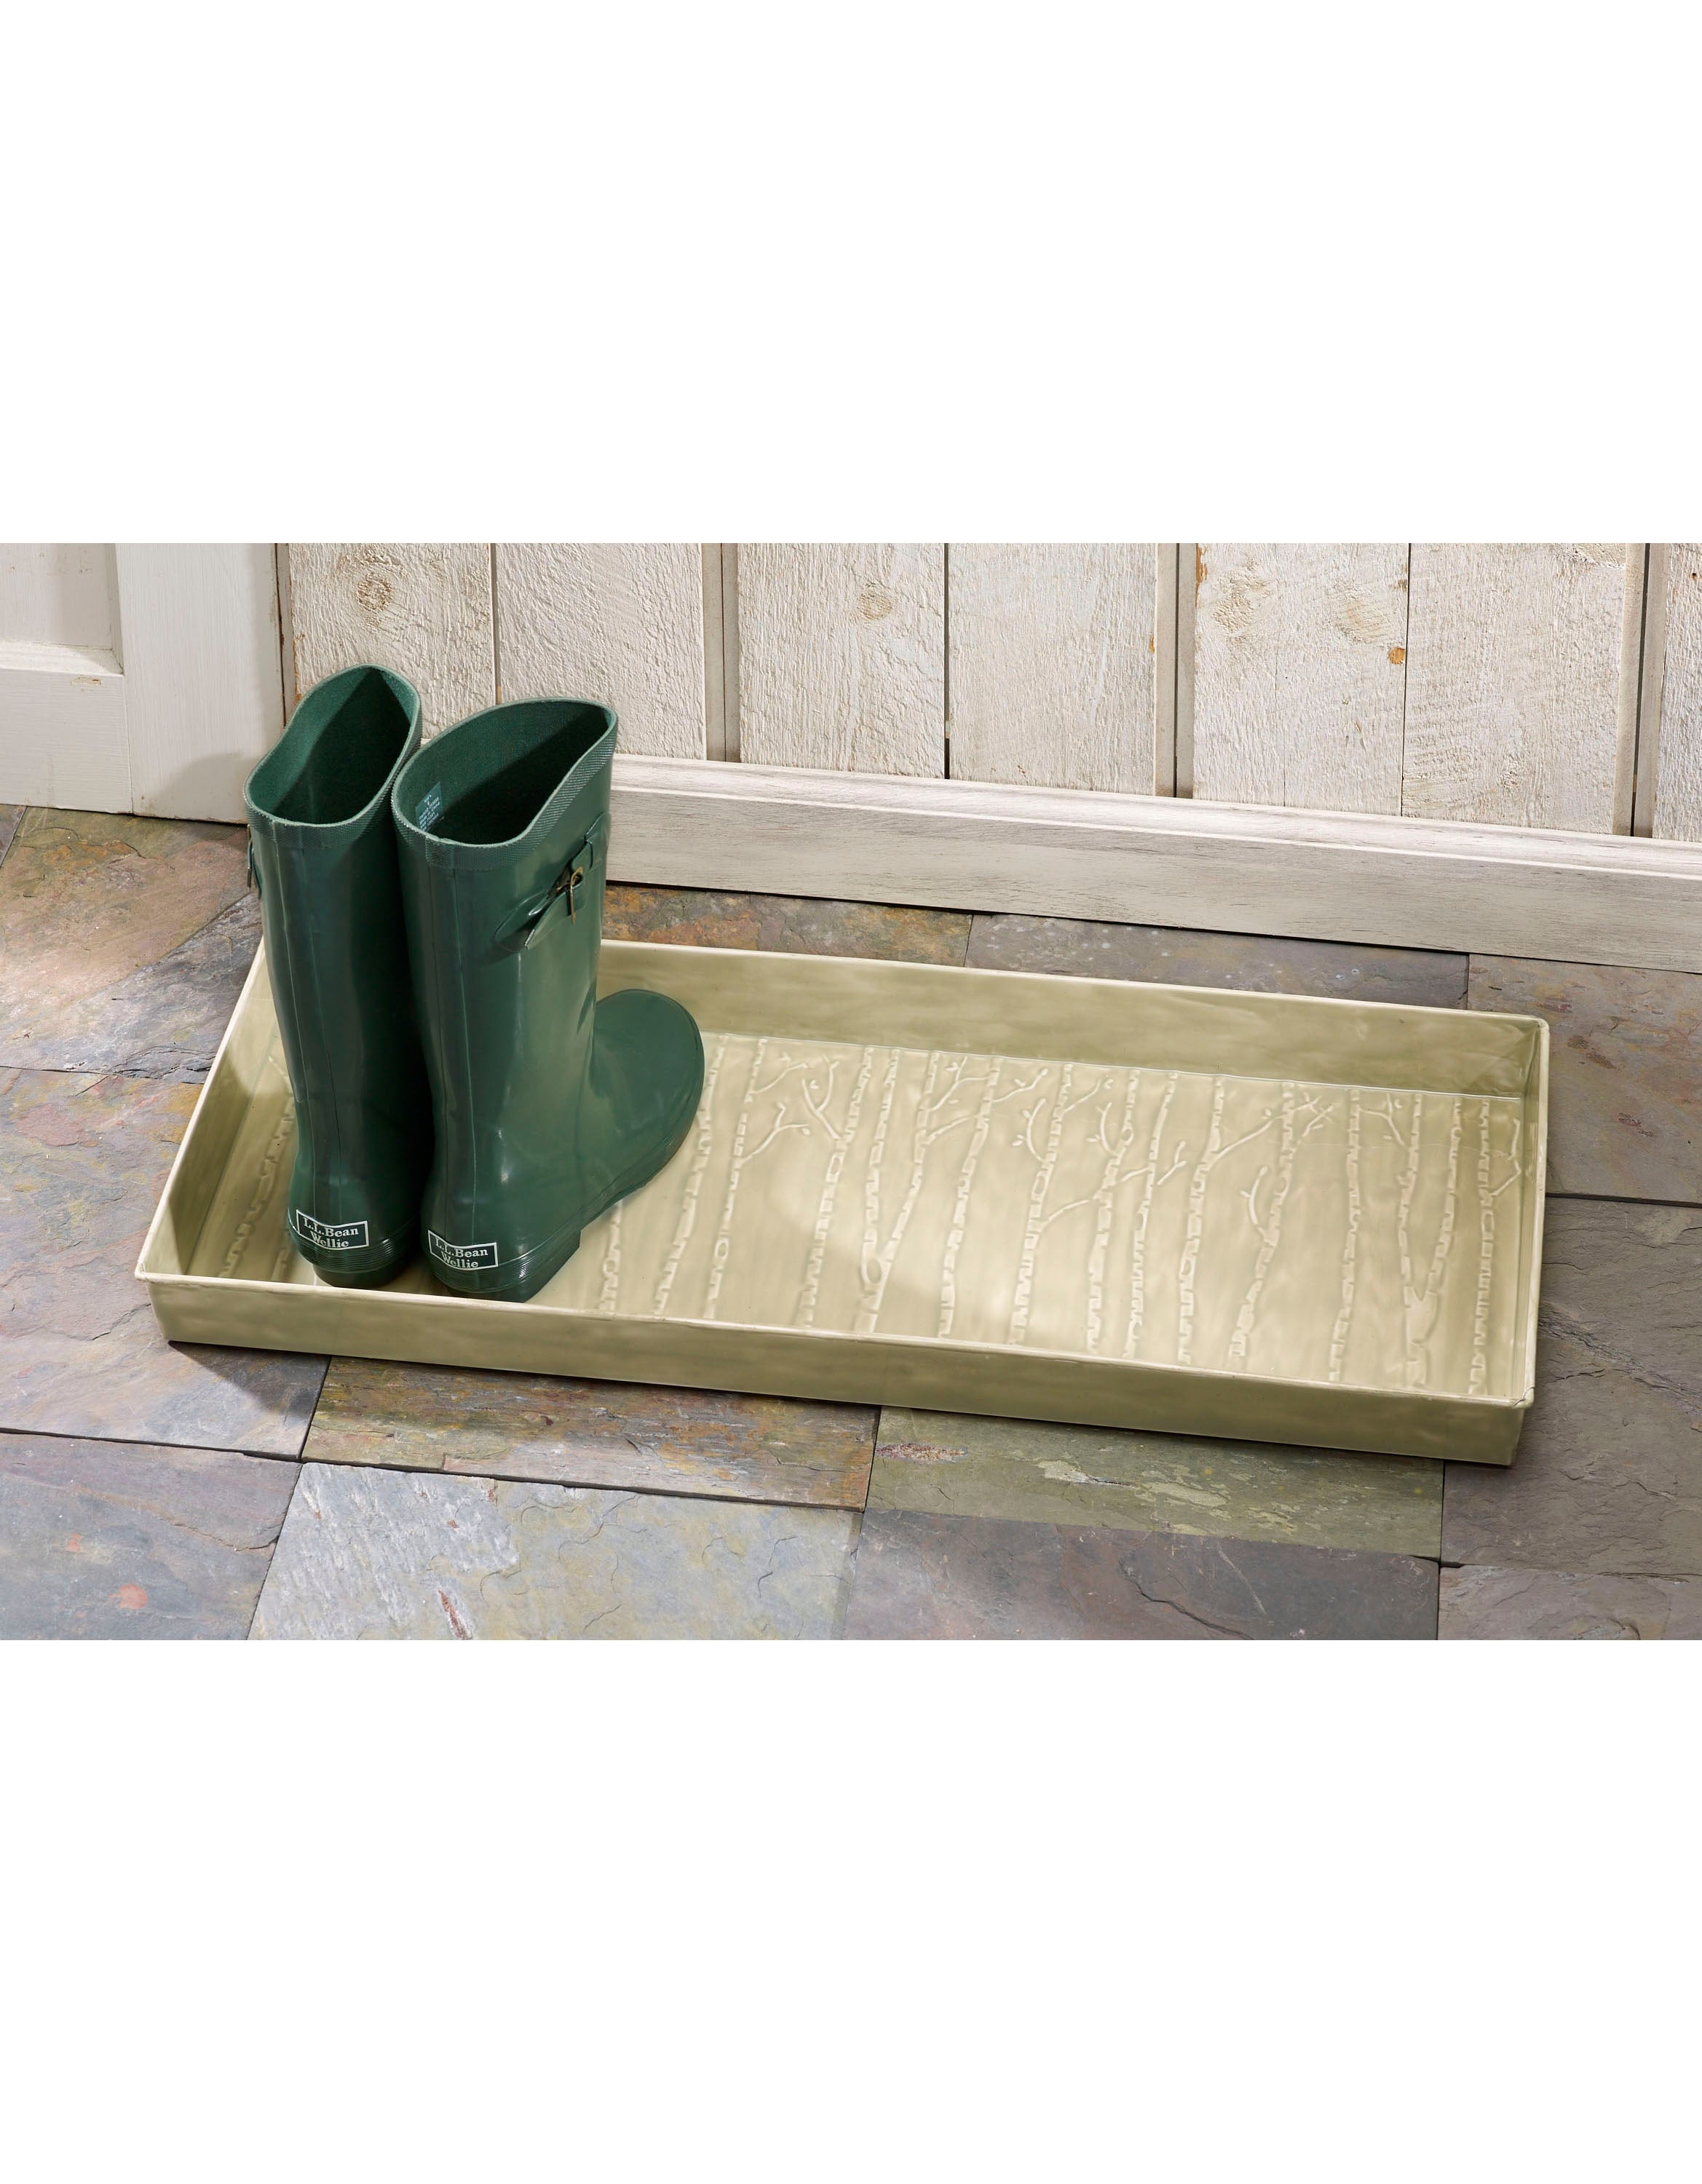 Birch Forest Boot Tray